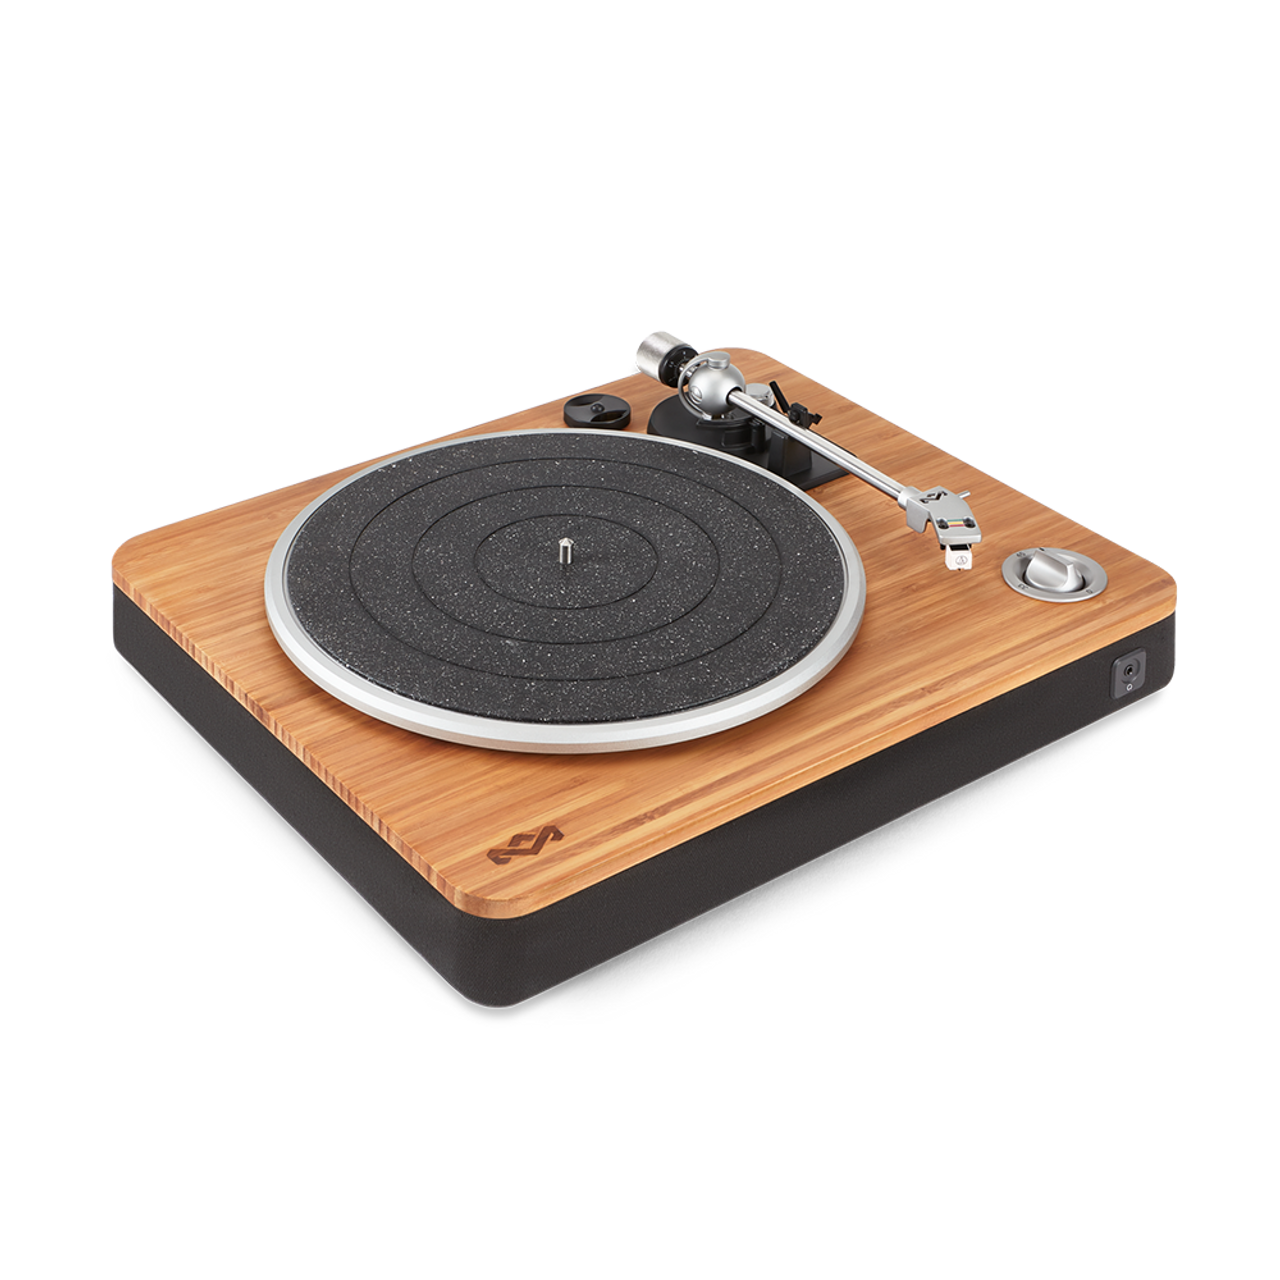 Stir It Up Turntable | House of Marley